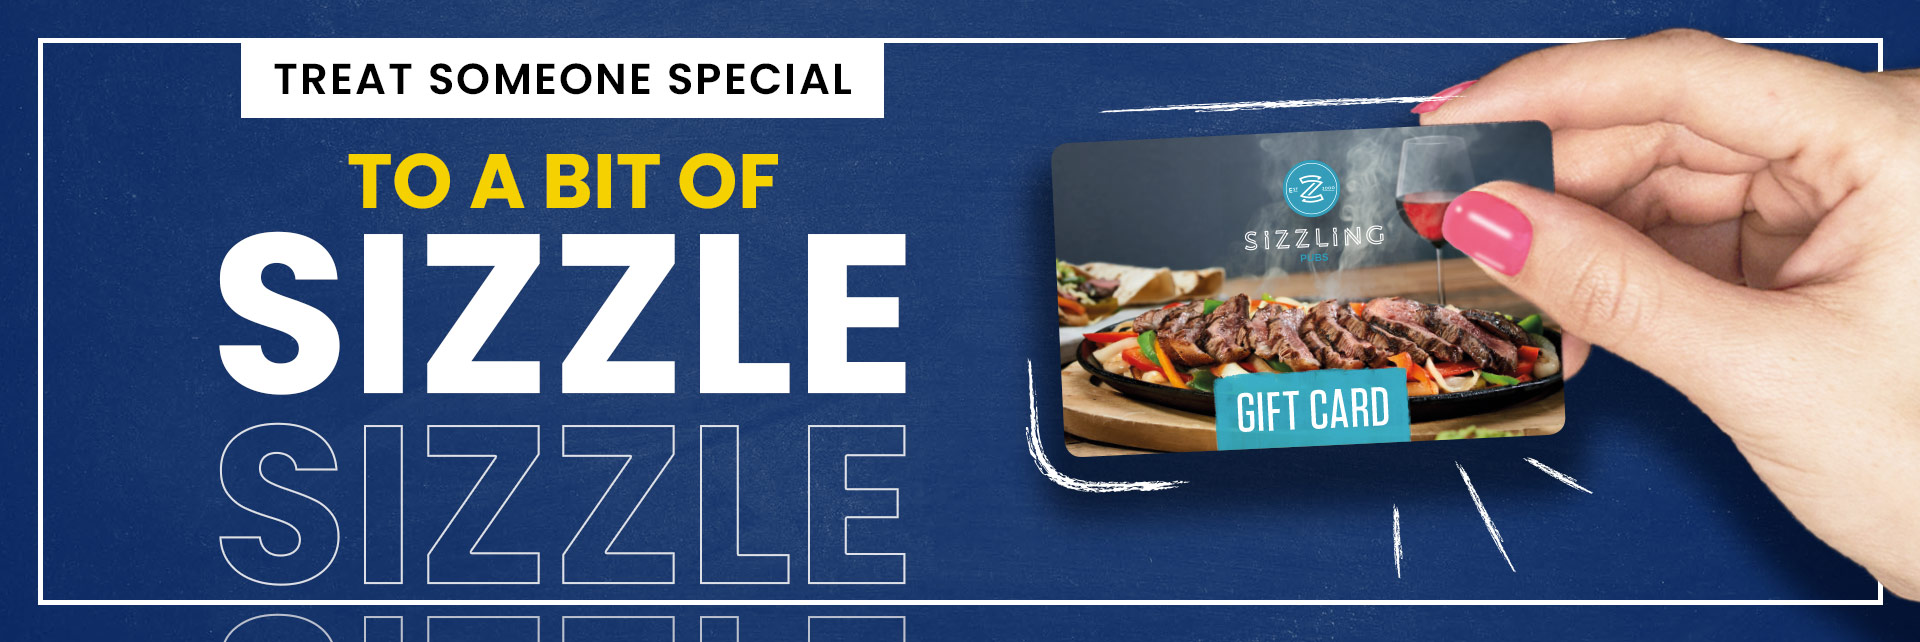 Sizzling Pubs Gift Card at The Amber Tavern in Birmingham